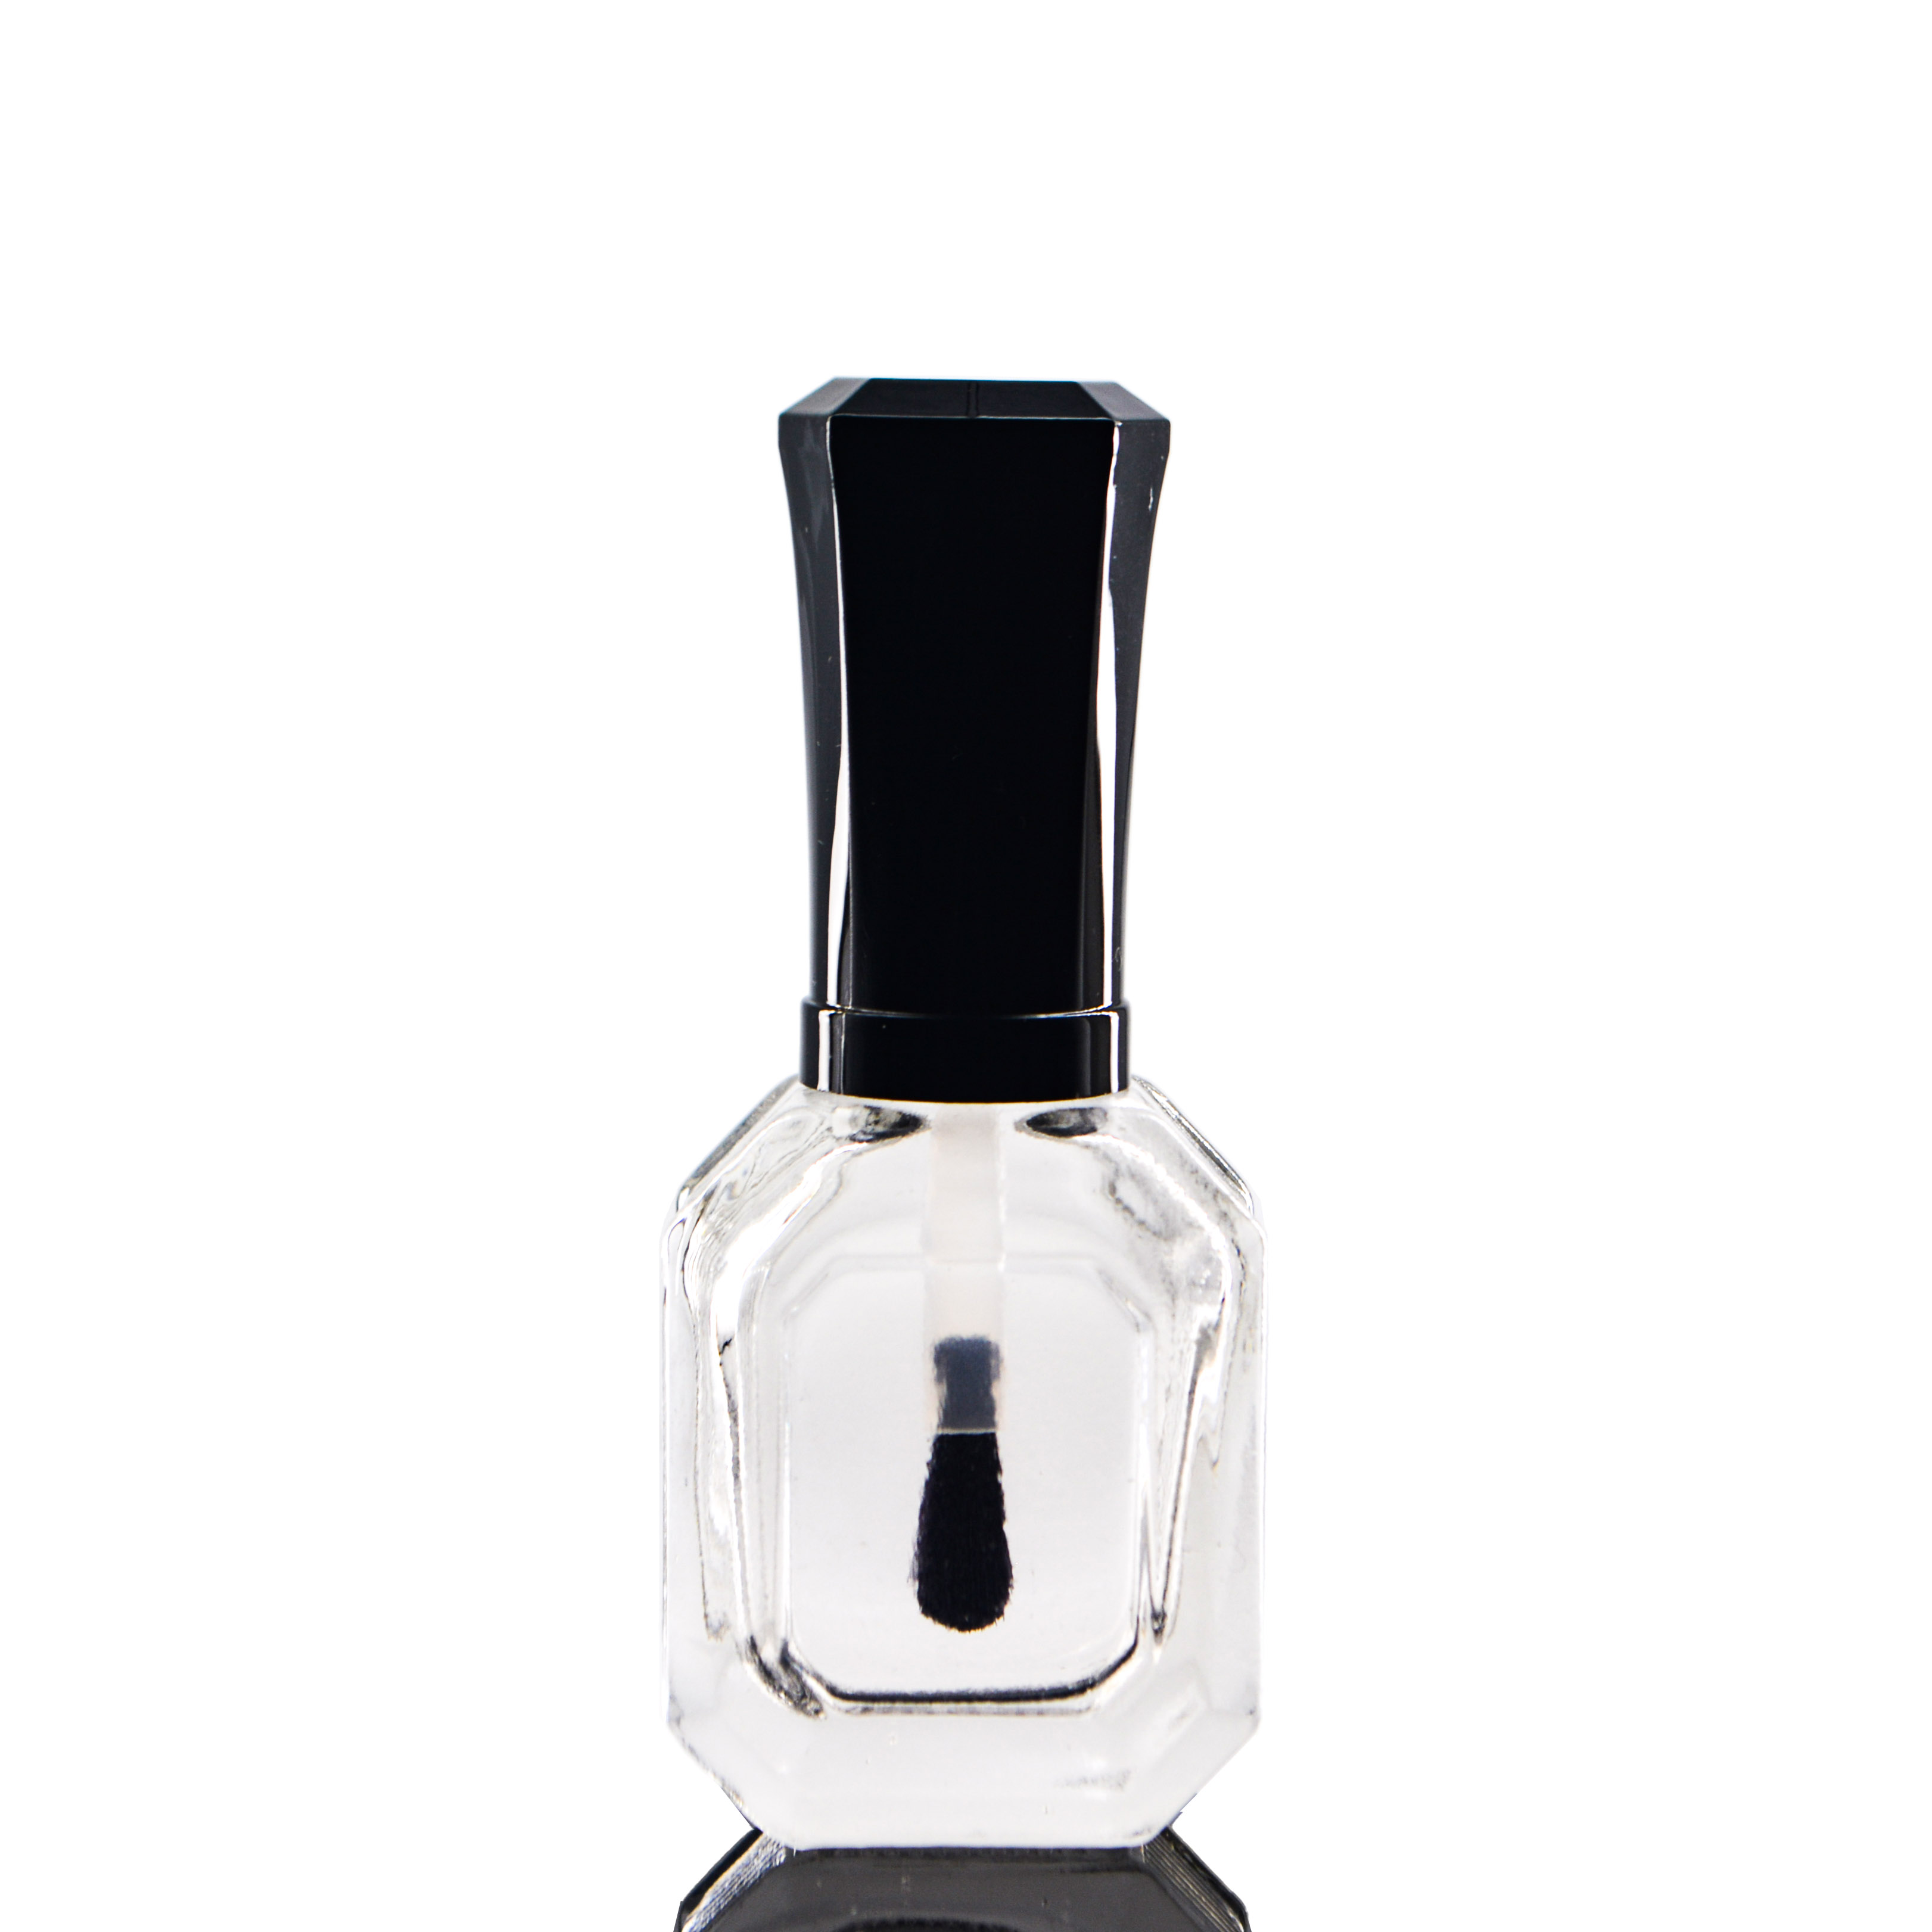 Glass Nail Polish Bottles Empty Refillable Nail Polish Bottle Containers with Brush Cap